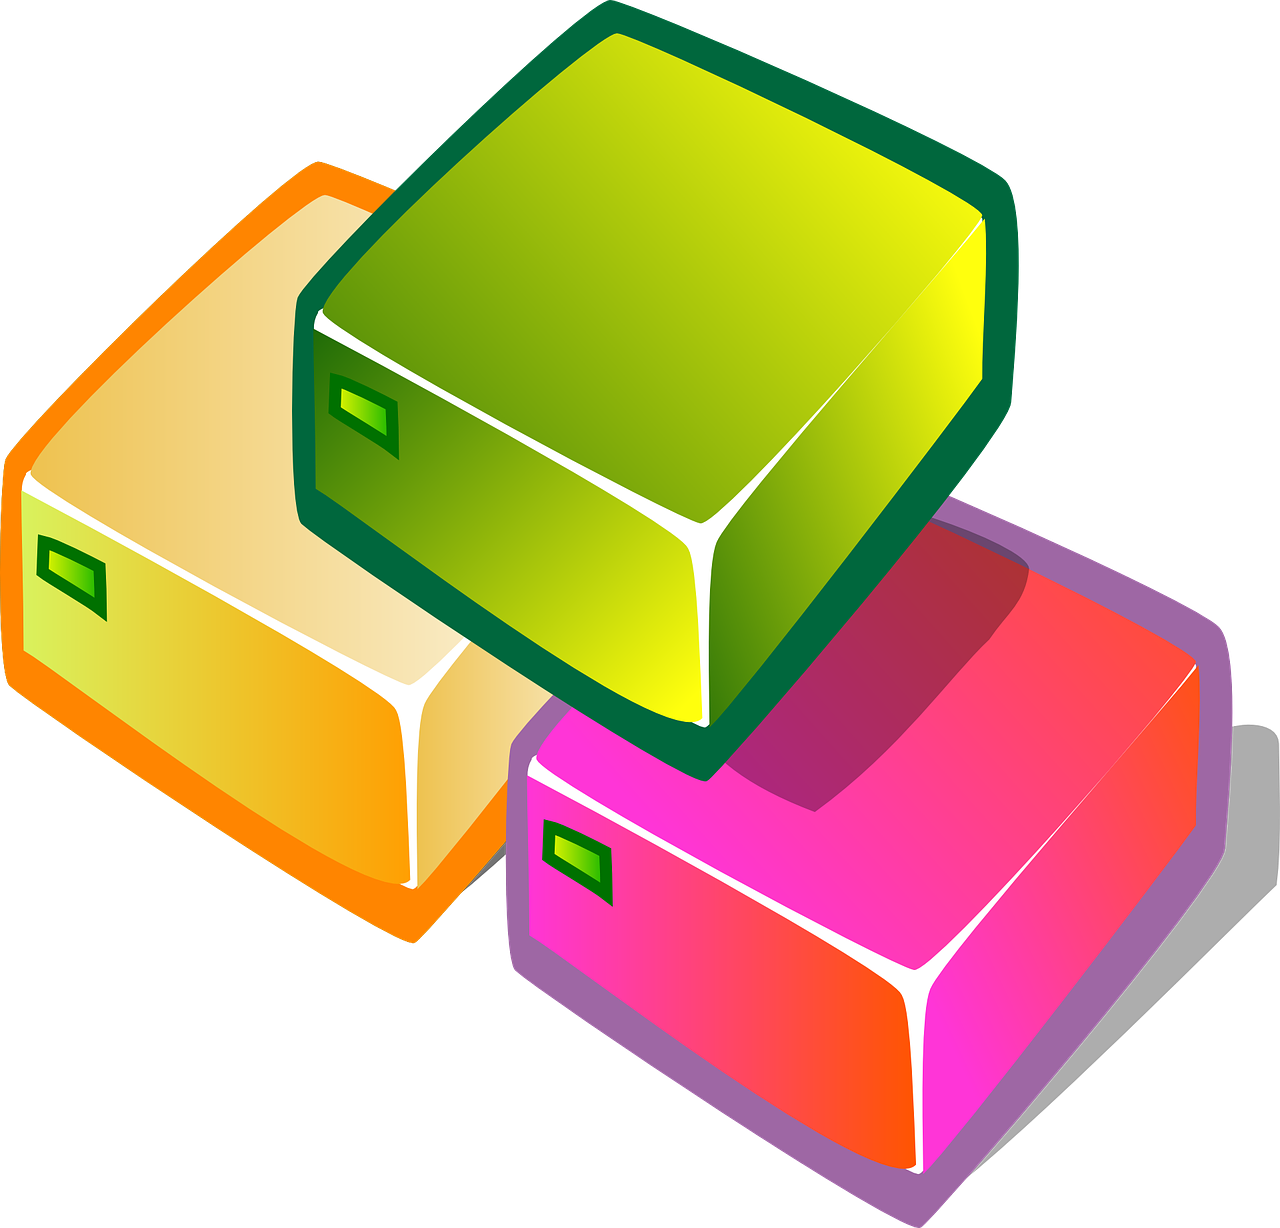 three different colored boxes stacked on top of each other, a screenshot, by Randy Post, computer art, hdd, clipart icon, mango, colorful”